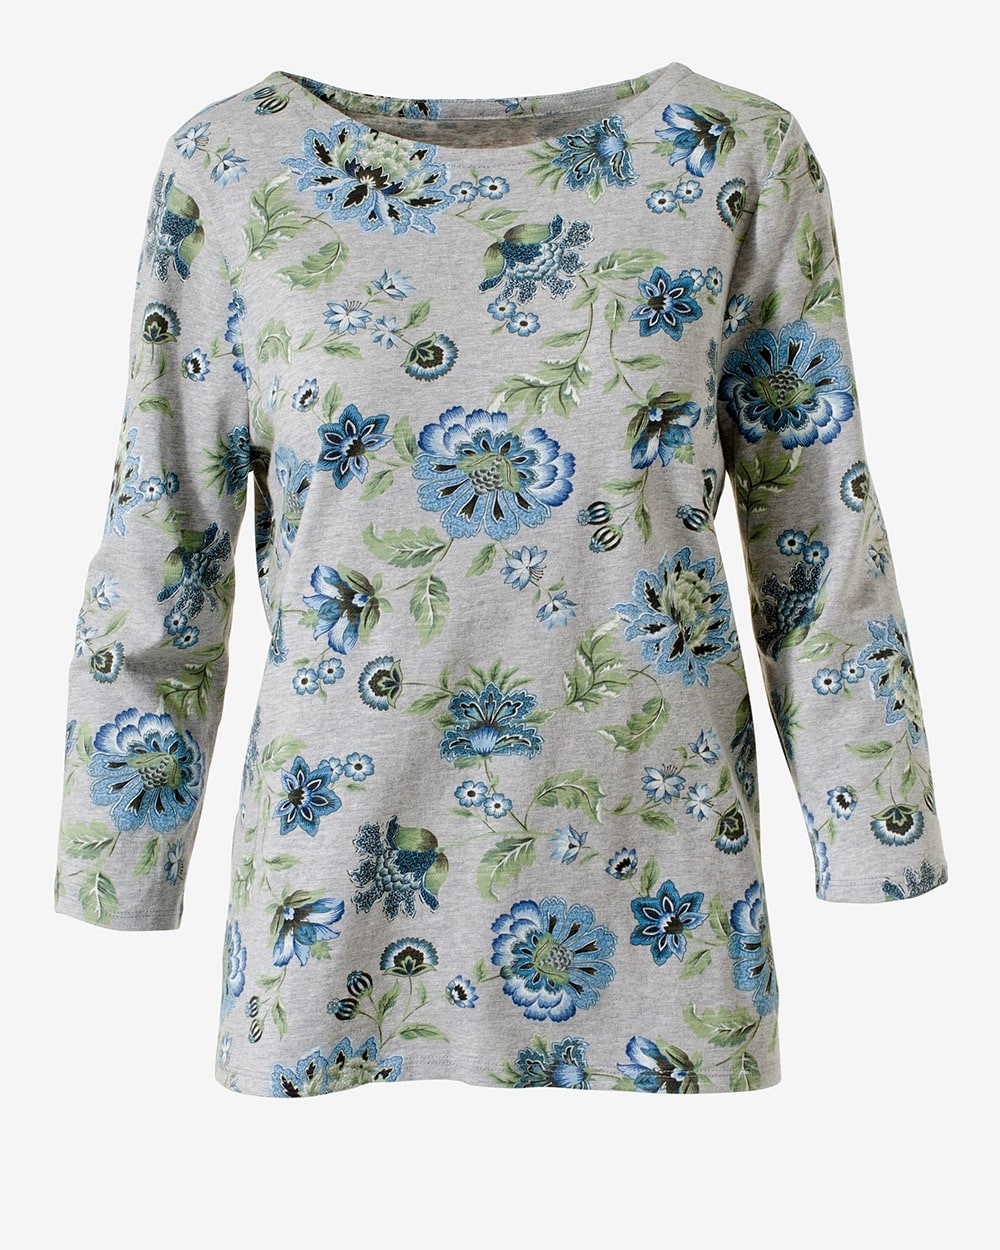 Tranquil Floral Boat-Neck Tee